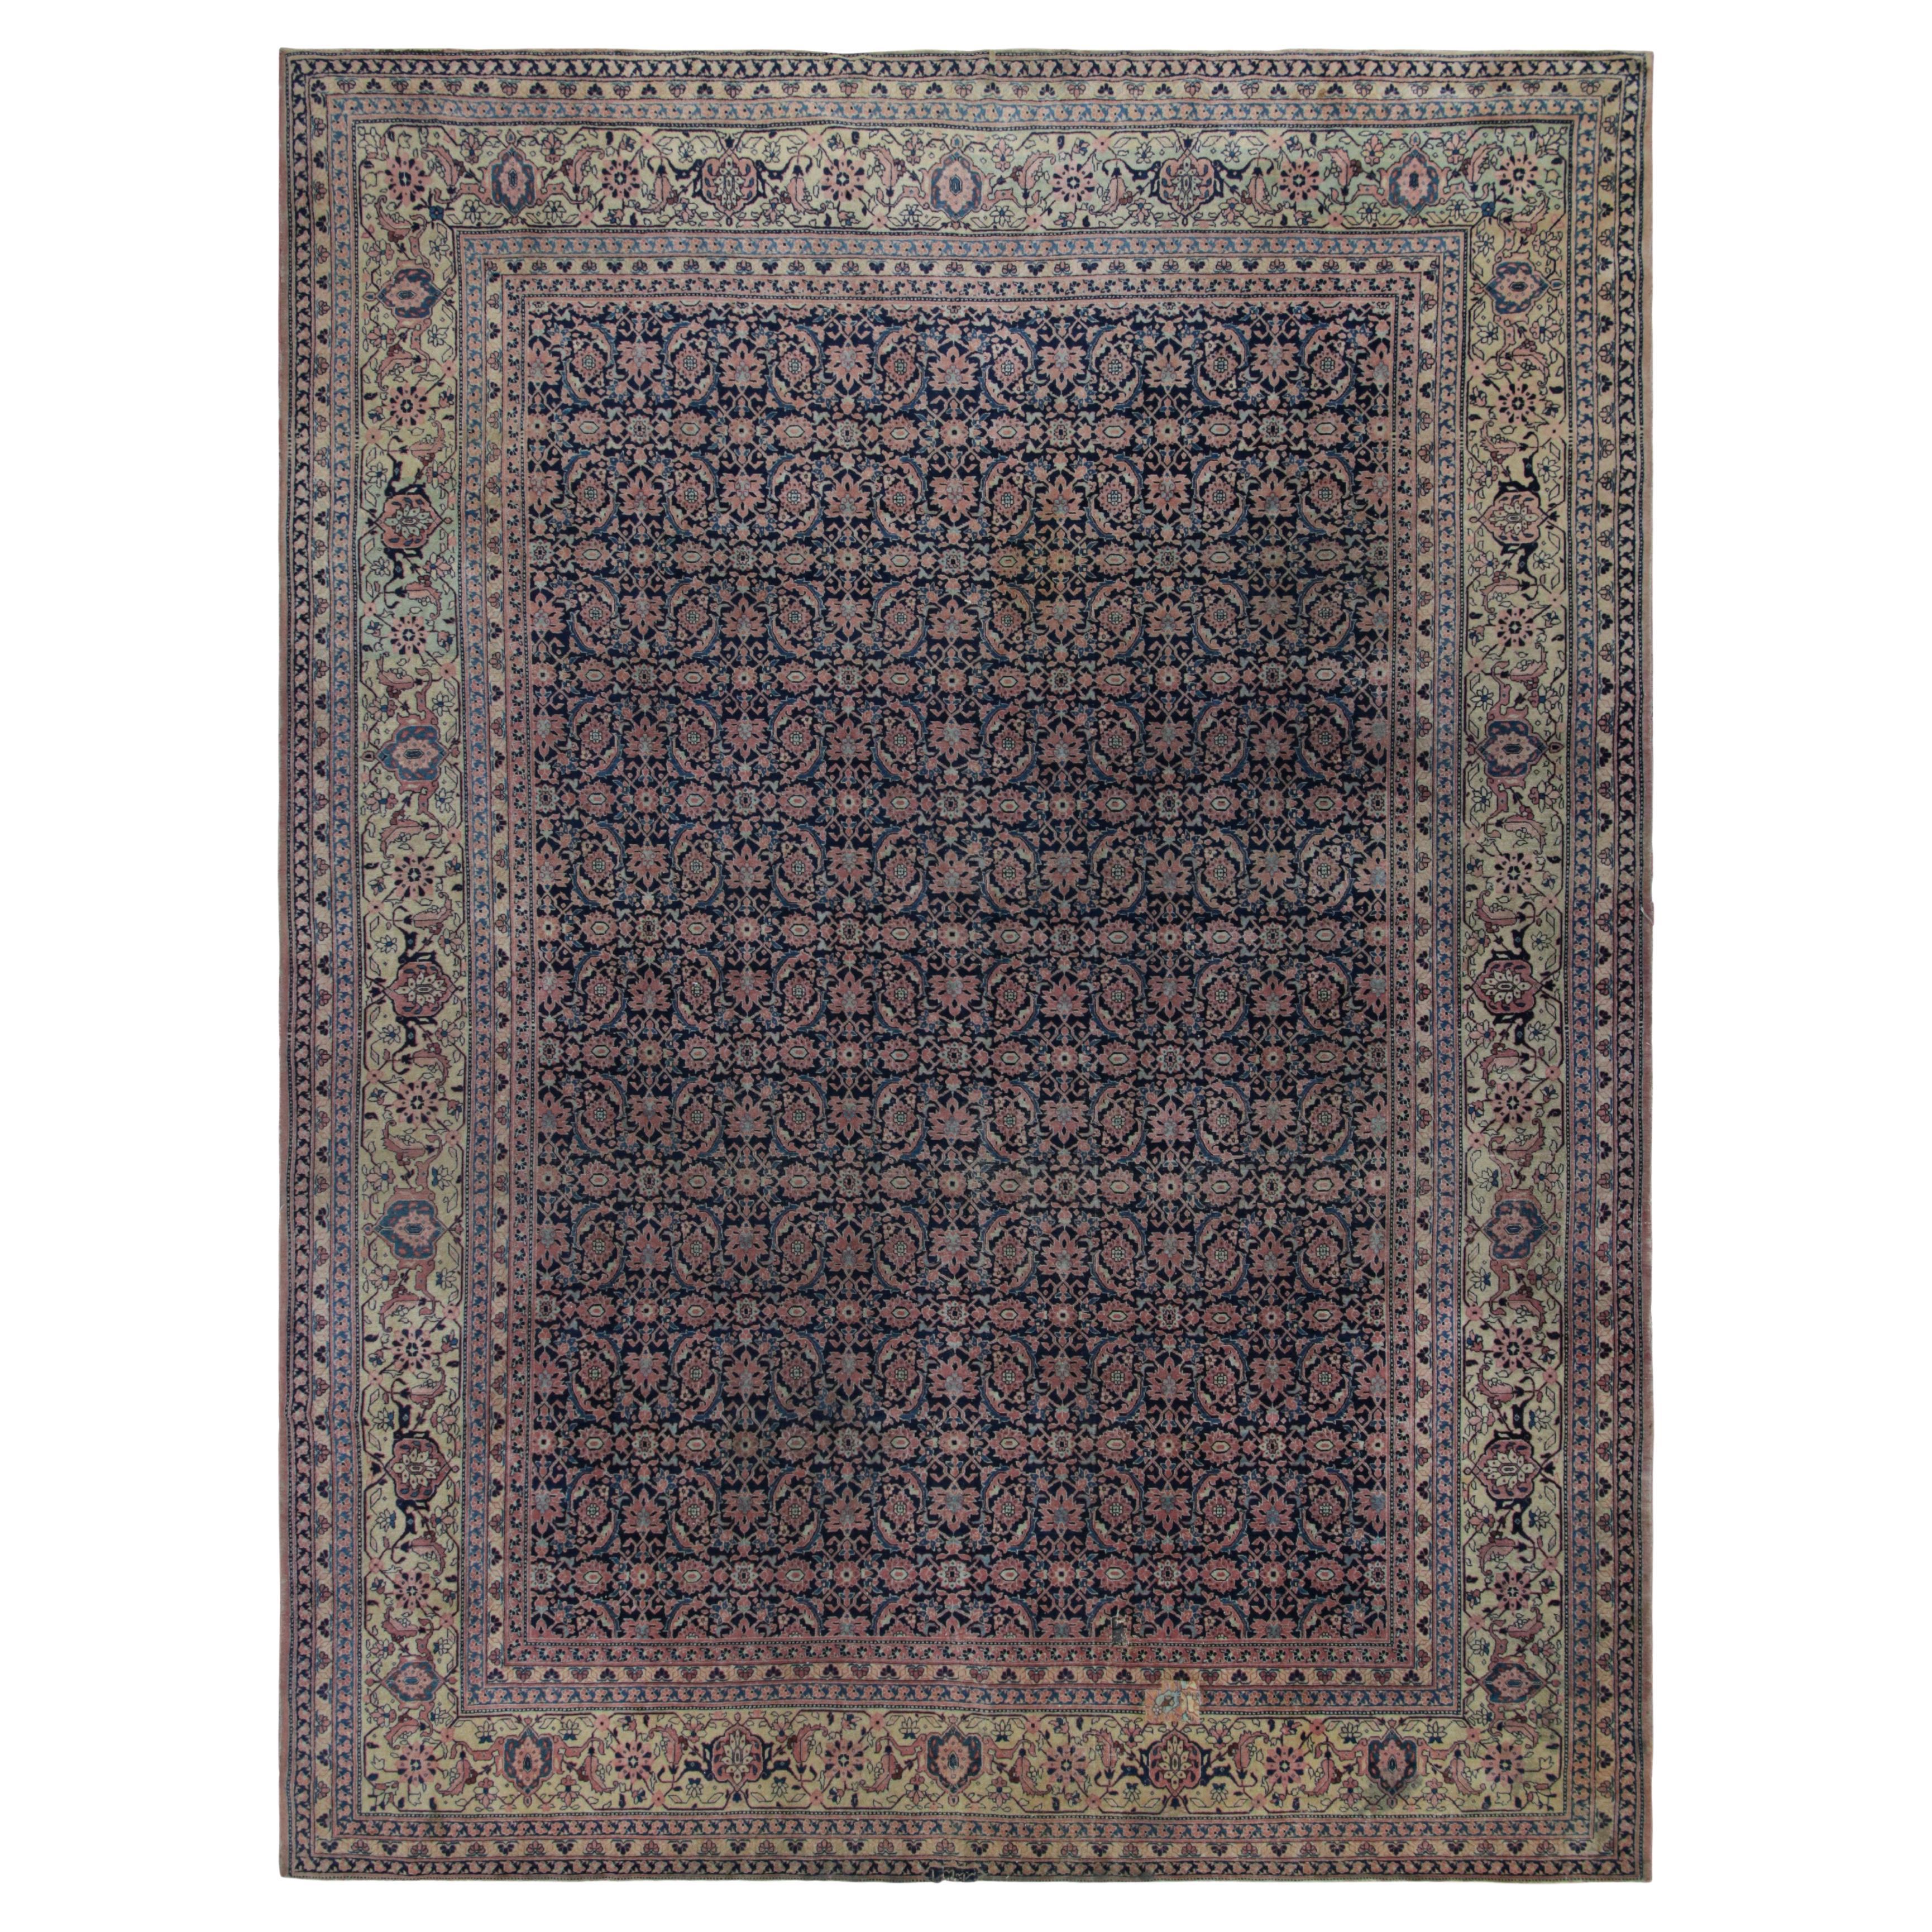 Antique Tabriz Persian Rug in Blue & Gold With Floral Patterns, From Rug & Kilim For Sale